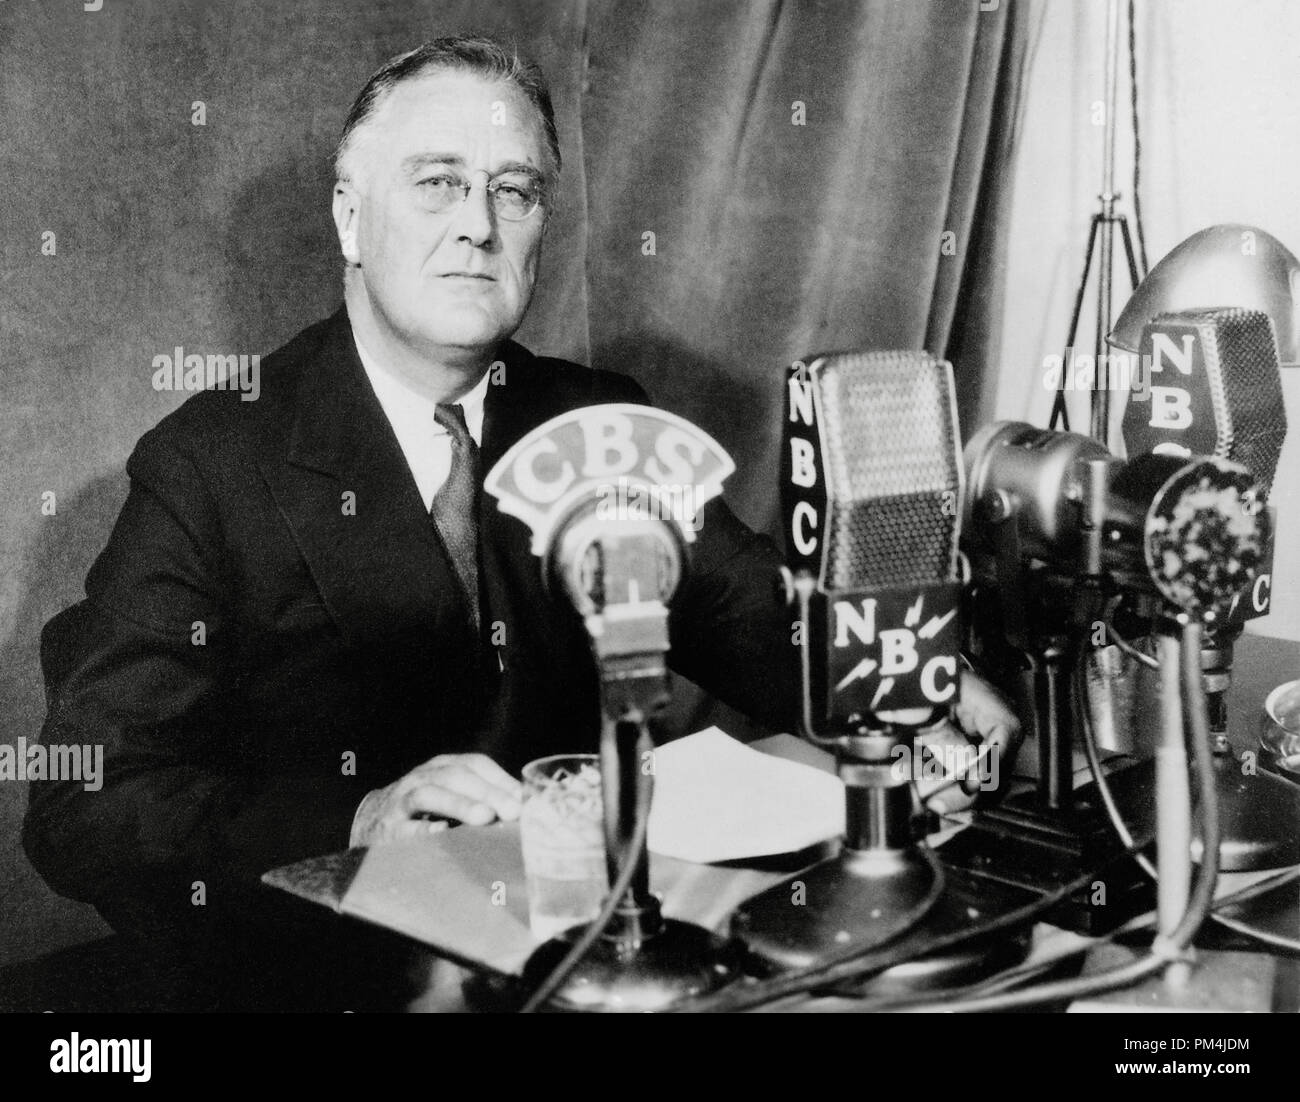 President Franklin D. Roosevelt, 1934, during fireside chats, a series of 30 evening radio conversations (chats) given by U.S. President Franklin D. Roosevelt between 1933 and 1944.  File Reference # 1003 680THA Stock Photo